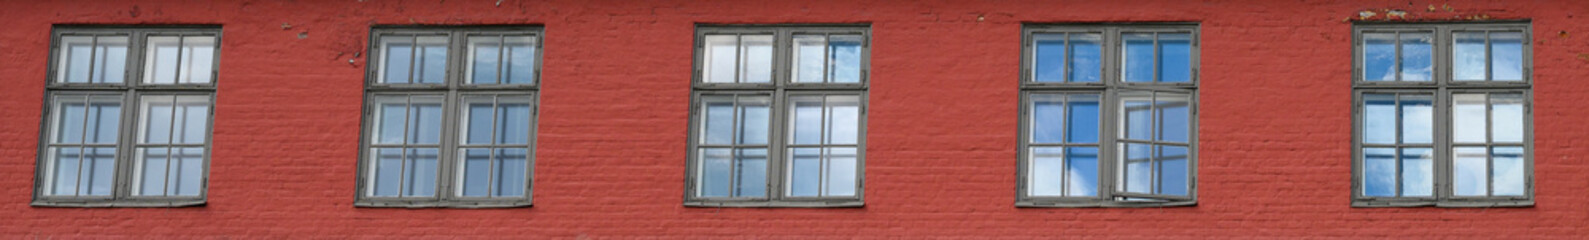 Row of square windows in a red brick wall, blue sky and clouds reflecting in the glass
